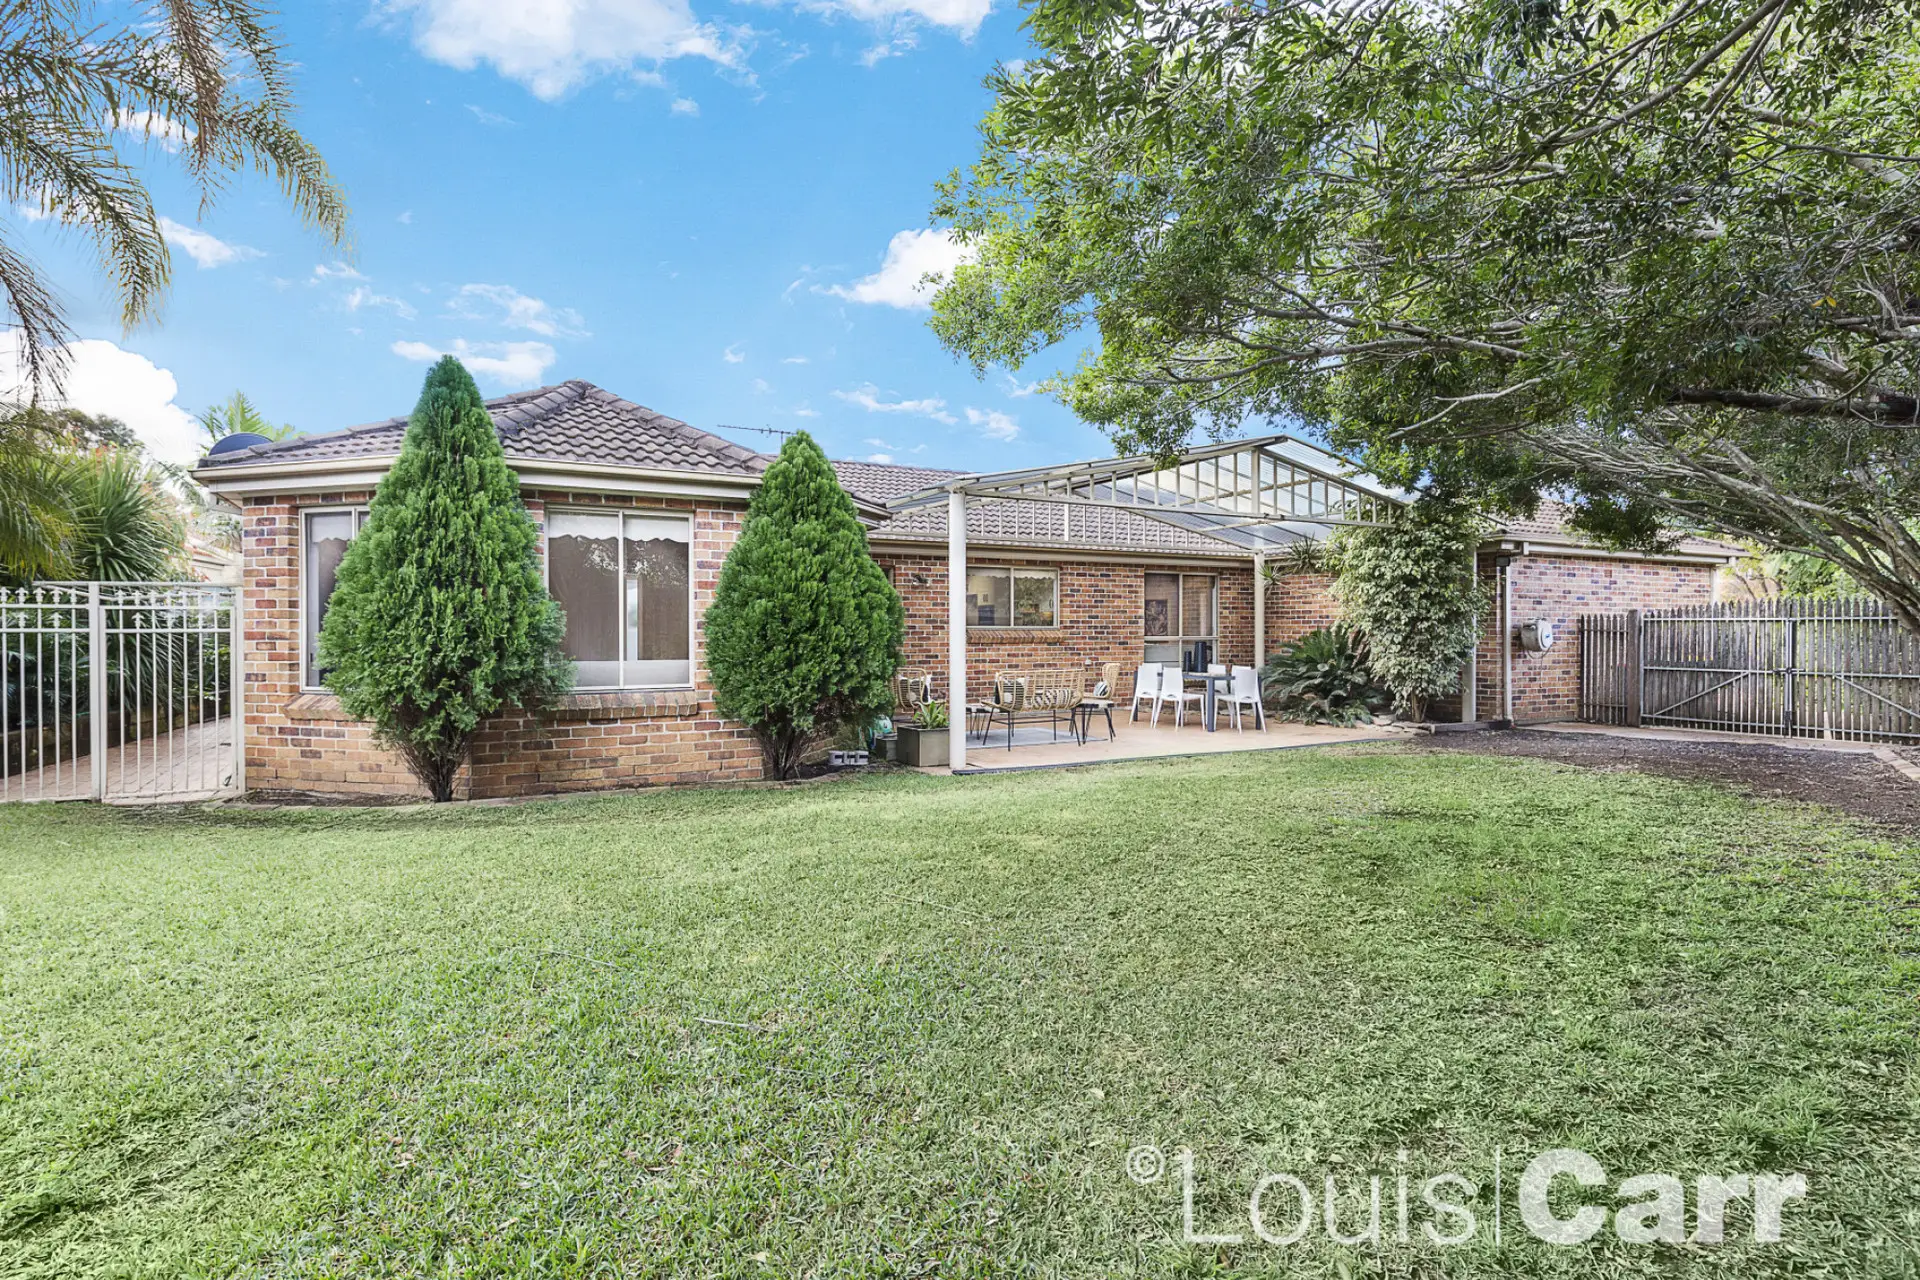 Photo #7: 3 Sandlewood Close, Rouse Hill - Sold by Louis Carr Real Estate